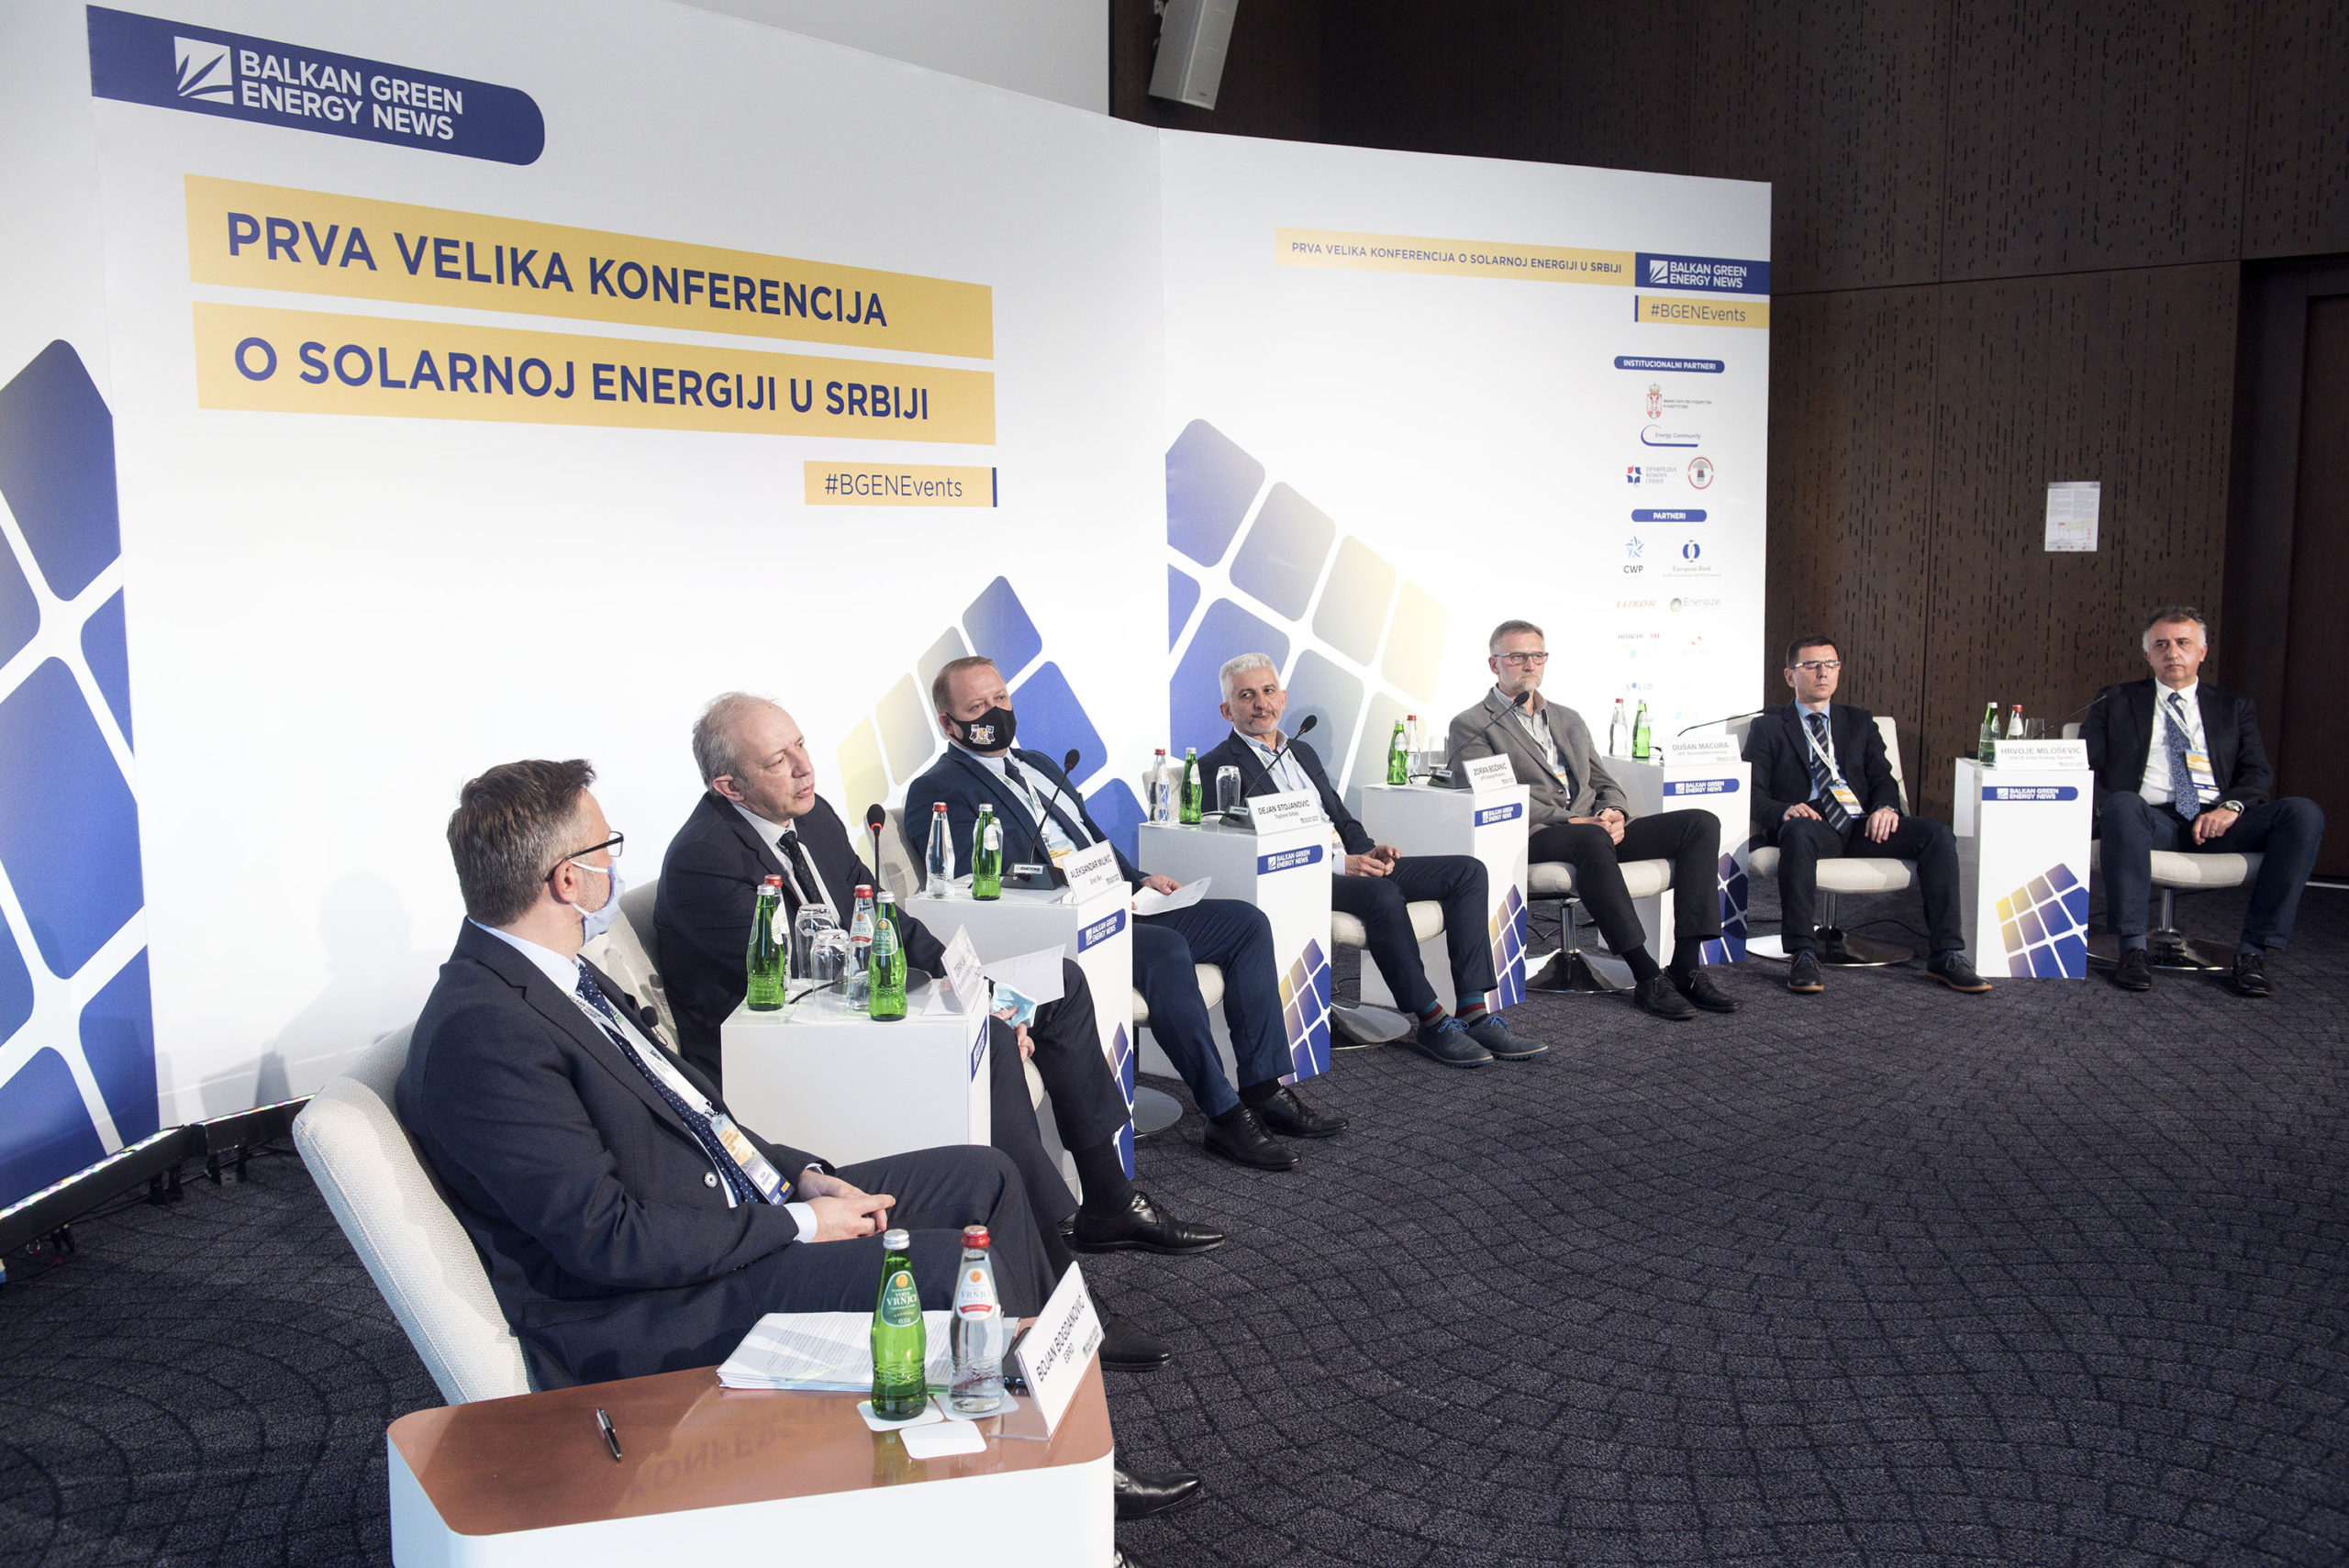 Serbia’s first big online conference on solar energy draws 2,000 attendees